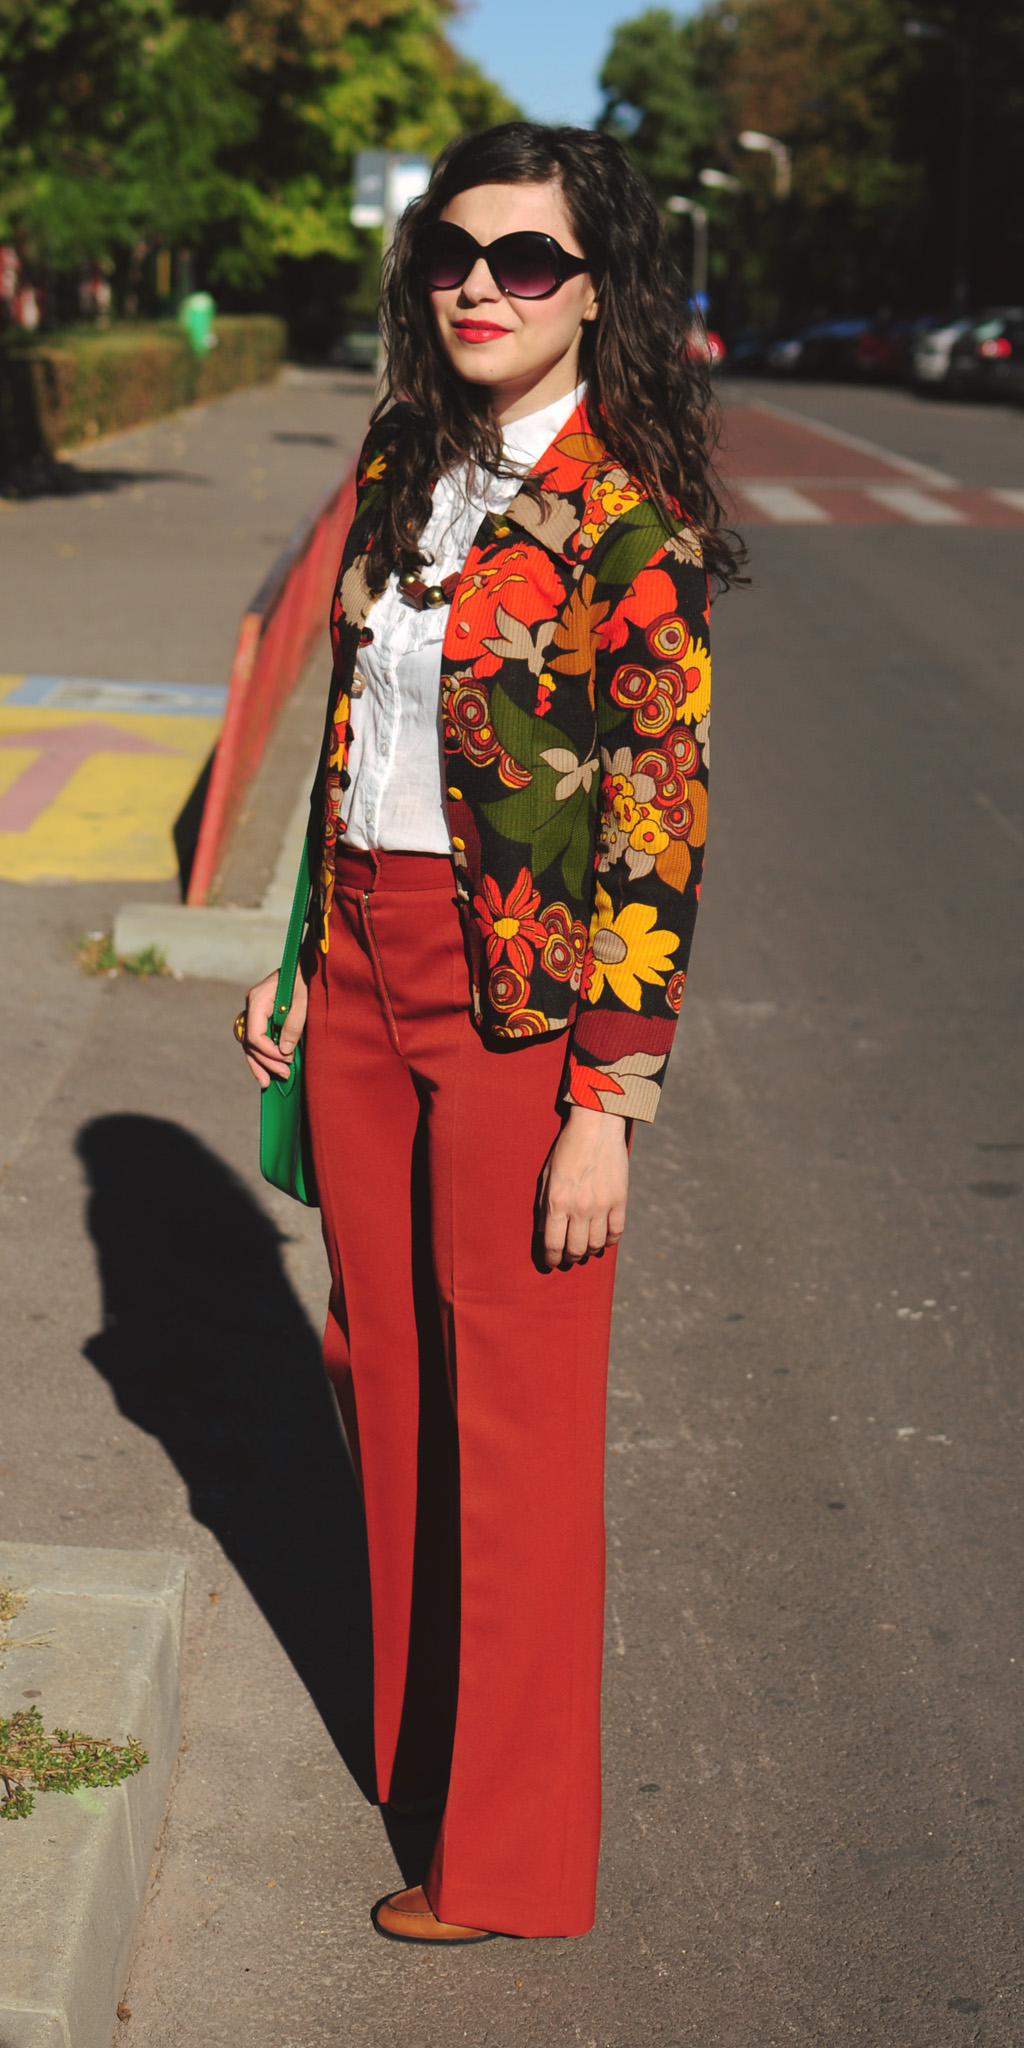 70s style outfit flowers blazer flares orange green satchel bag curly hair autumn thrifted